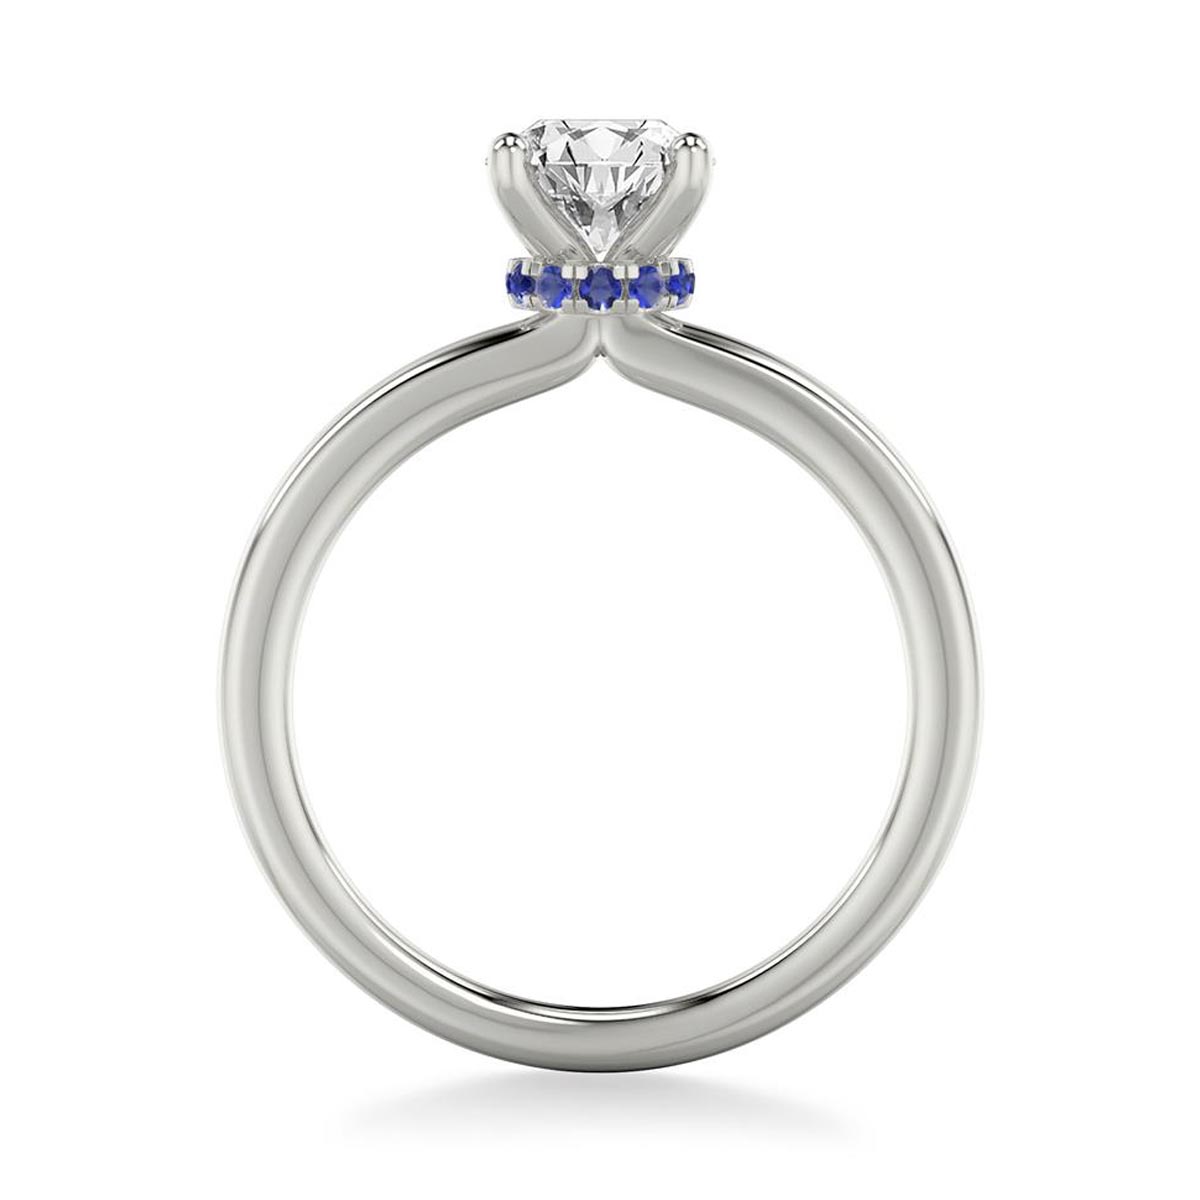 Artcarved Classic Oval Diamond Solitaire Engagement Ring Setting in 14kt White Gold with Hidden Sapphire Halo